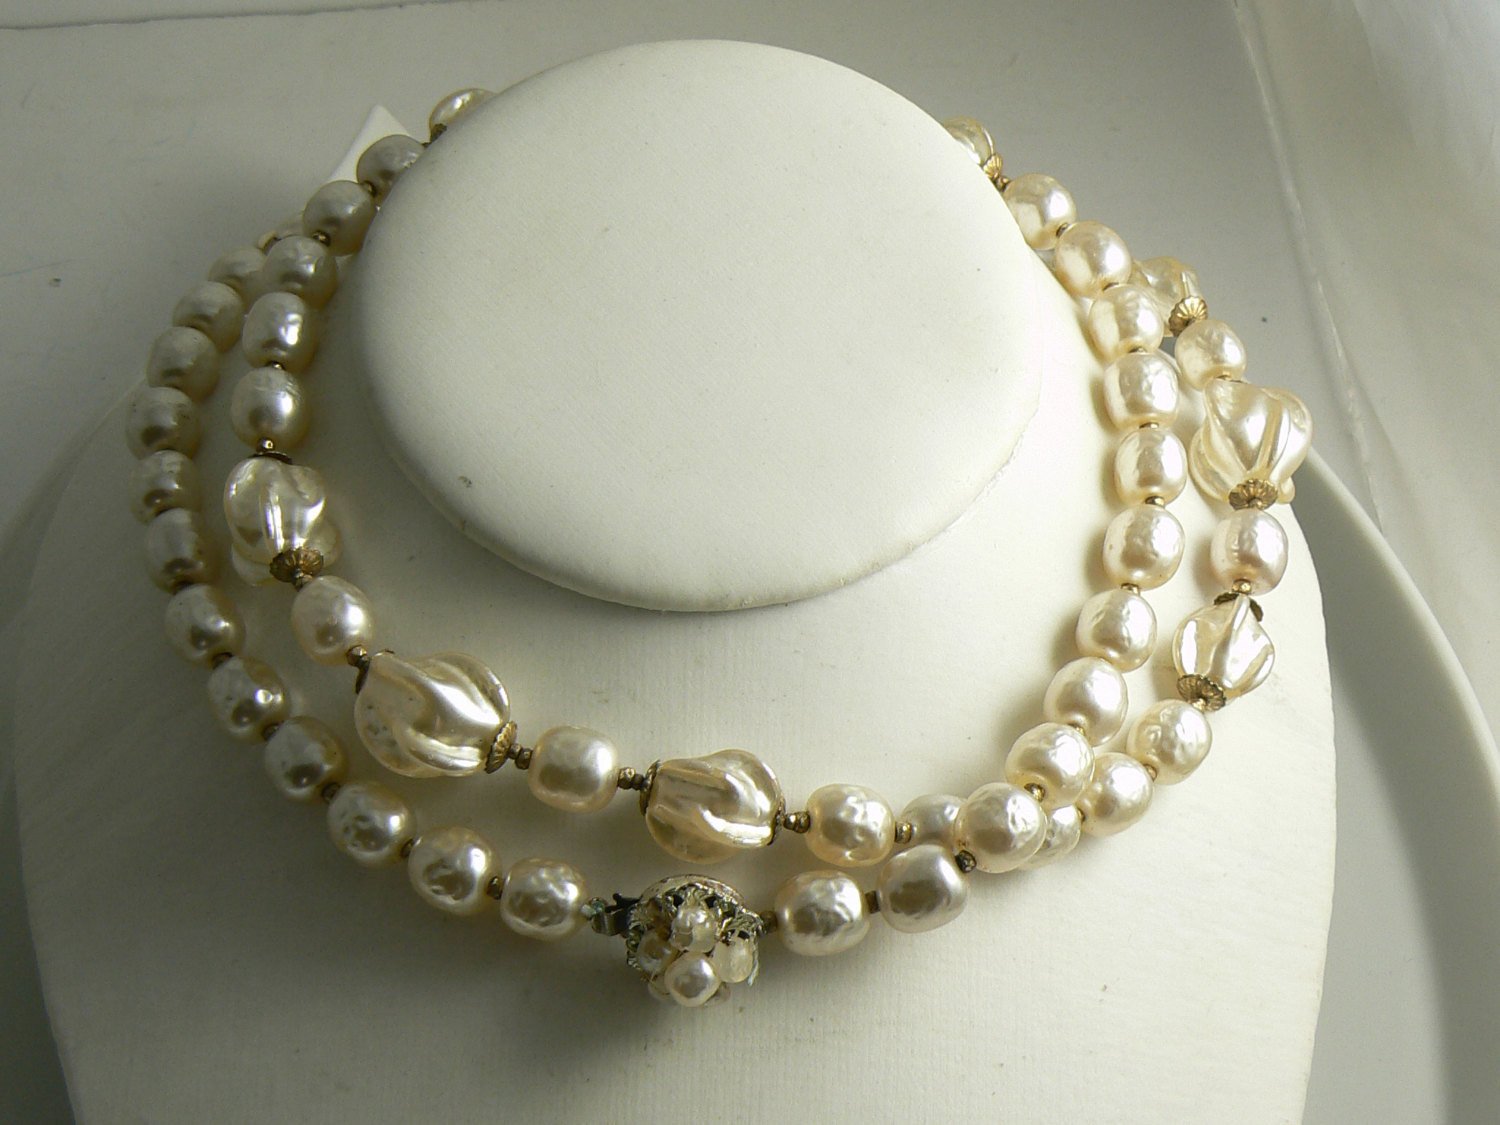 Fancy Extra Long Miriam Haskell Ruffled Baroque Pearl Necklace ...